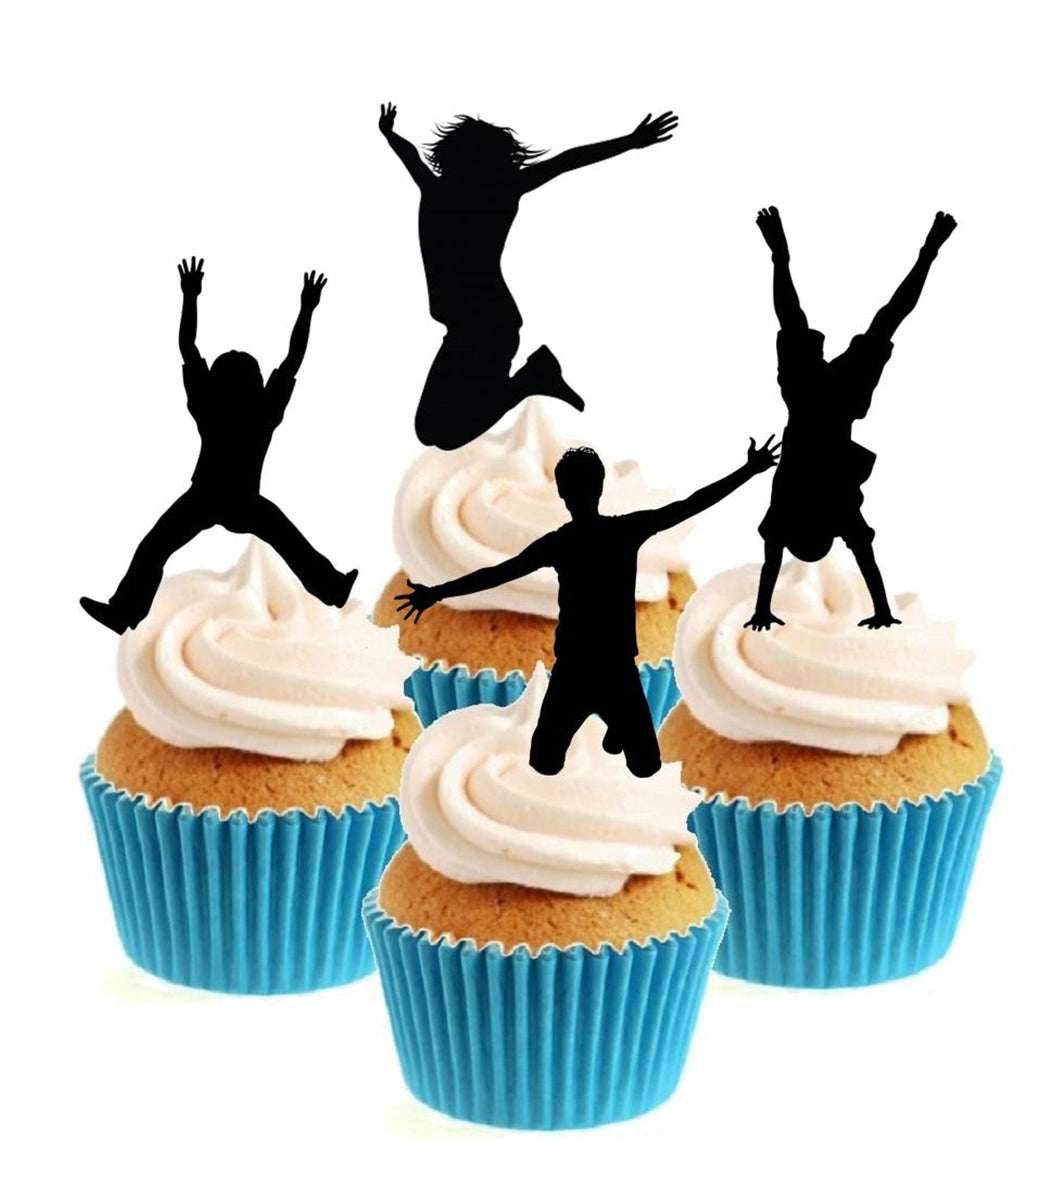 Trampolining Silhouette Collection Stand Up Cake Toppers (12 pack)